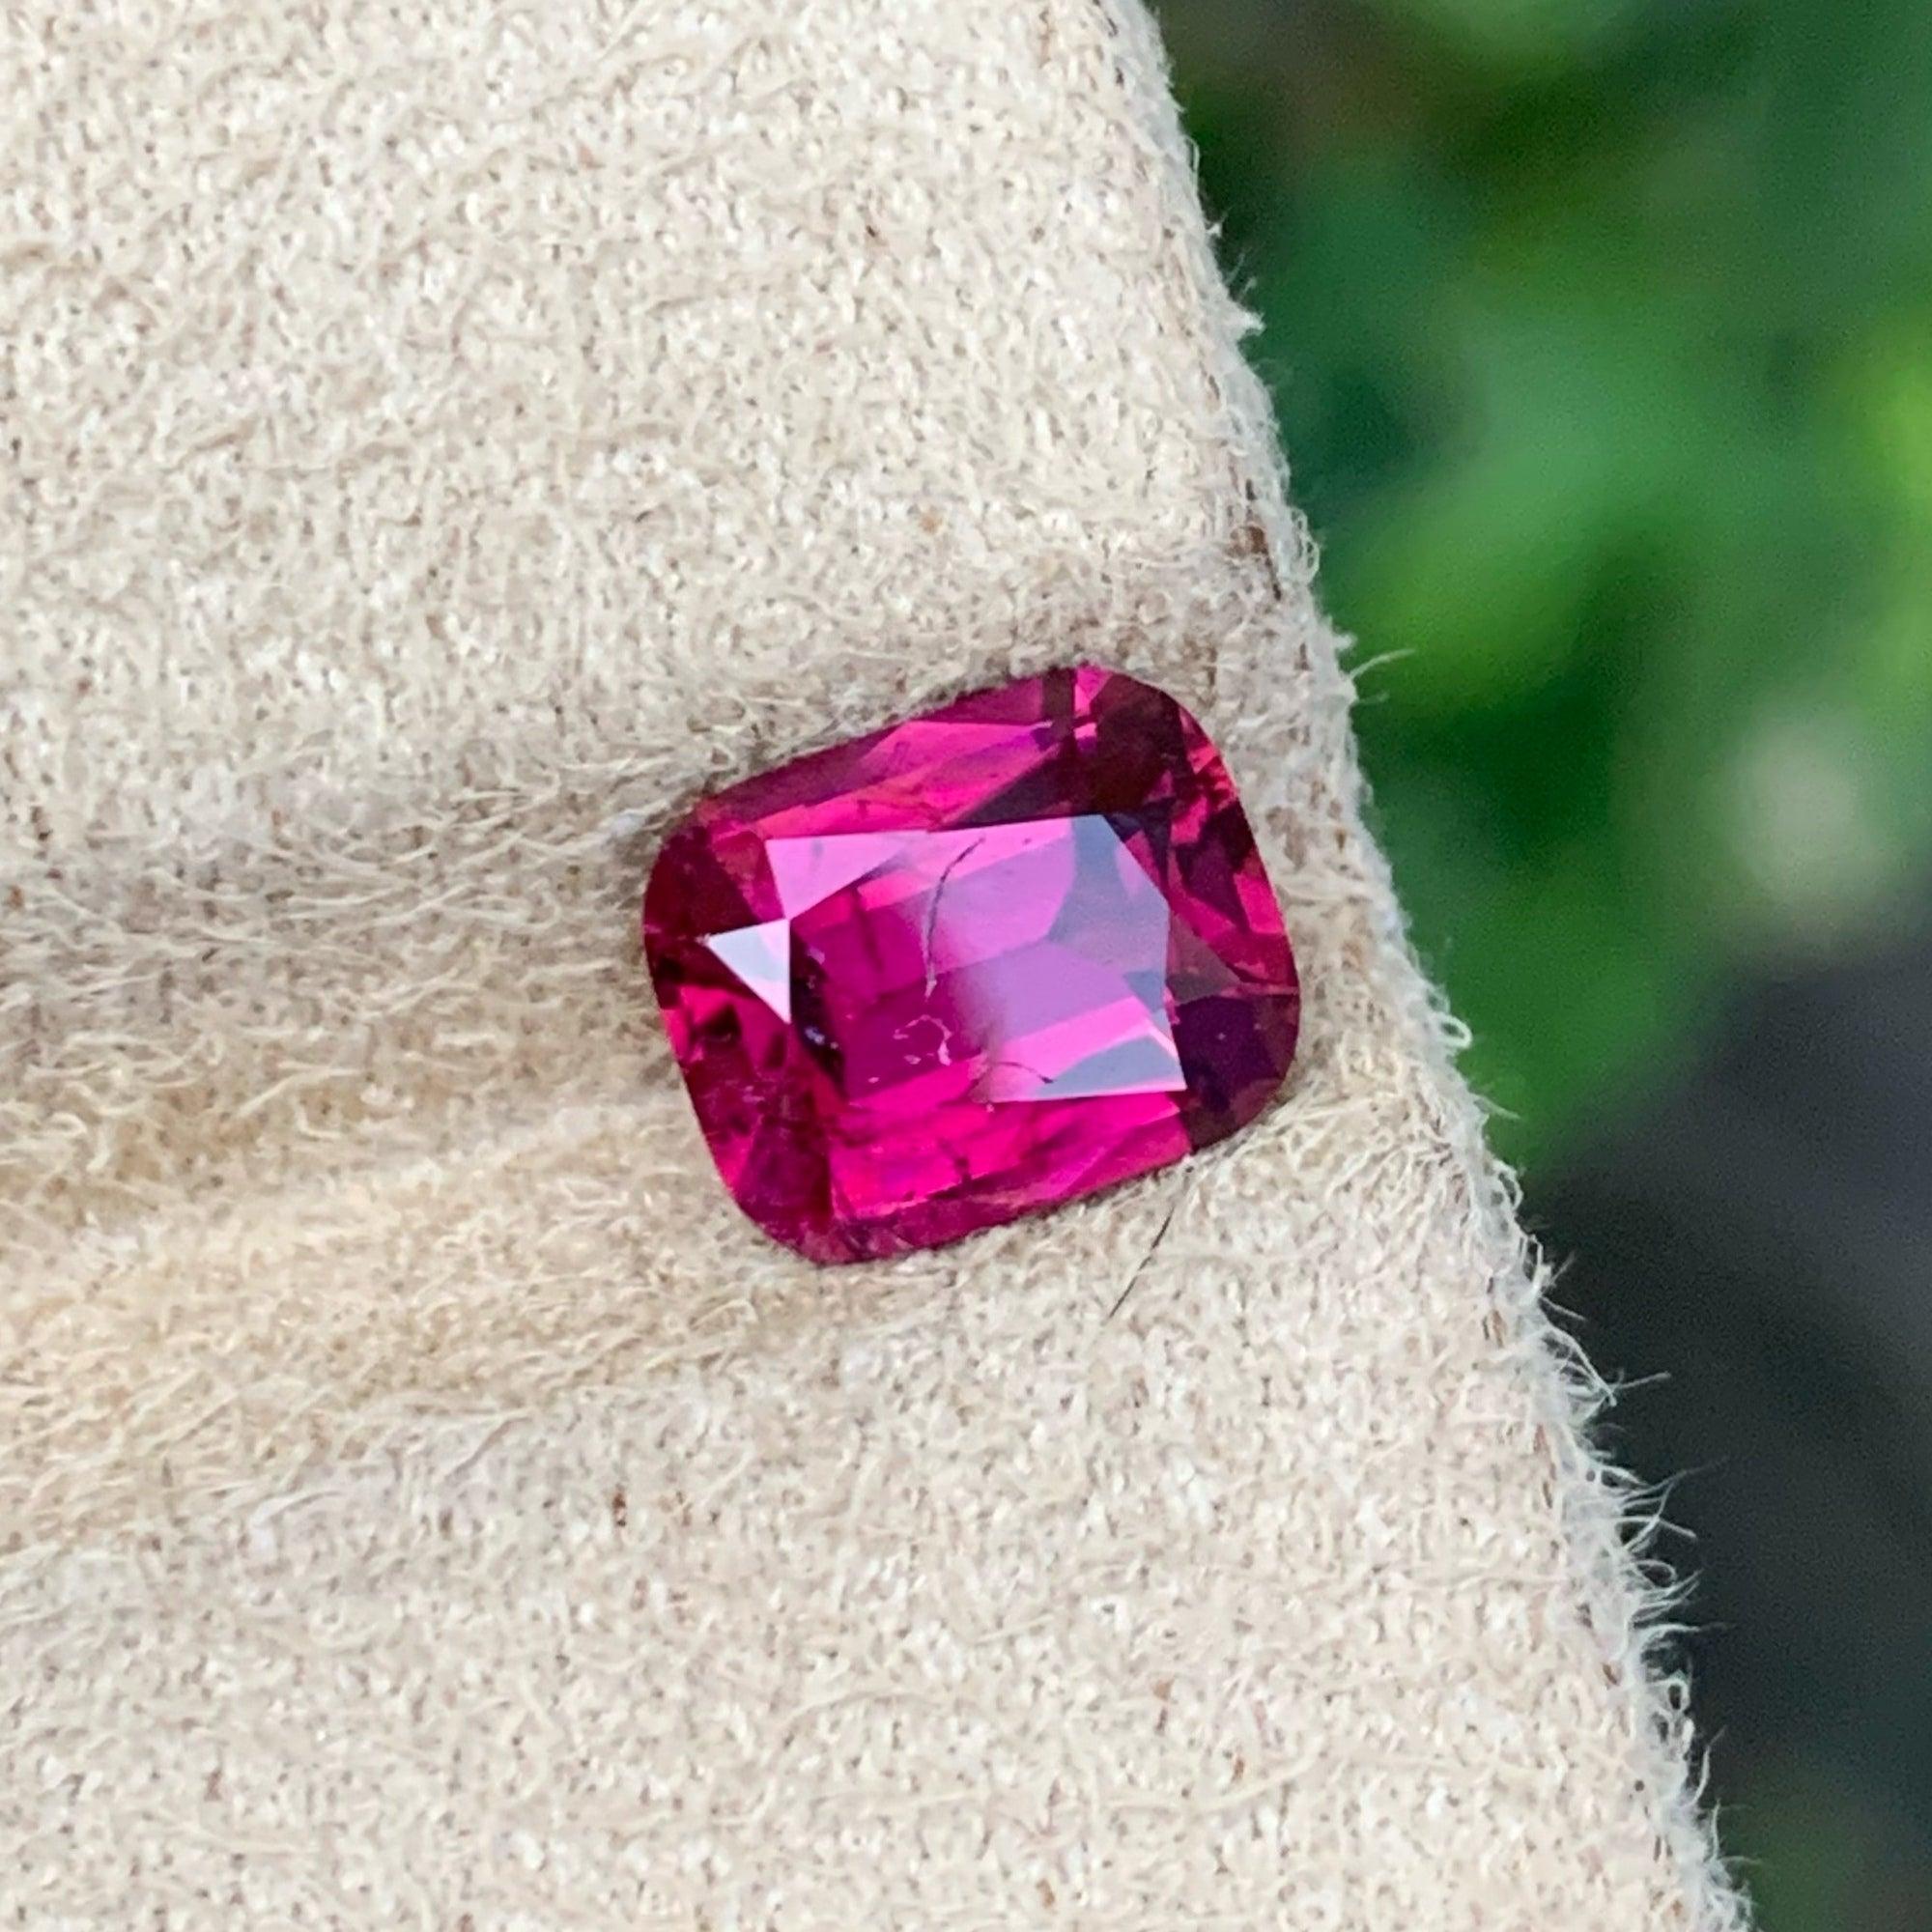 Pretty Bright Red Tourmaline Gemstone of 2.25 carats from Africa has a wonderful cut in a Cushion shape, incredible Red Color. Great brilliance. This gem is SI Clarity.

Product Information
GEMSTONE TYPE:	Pretty Bright Red Tourmaline